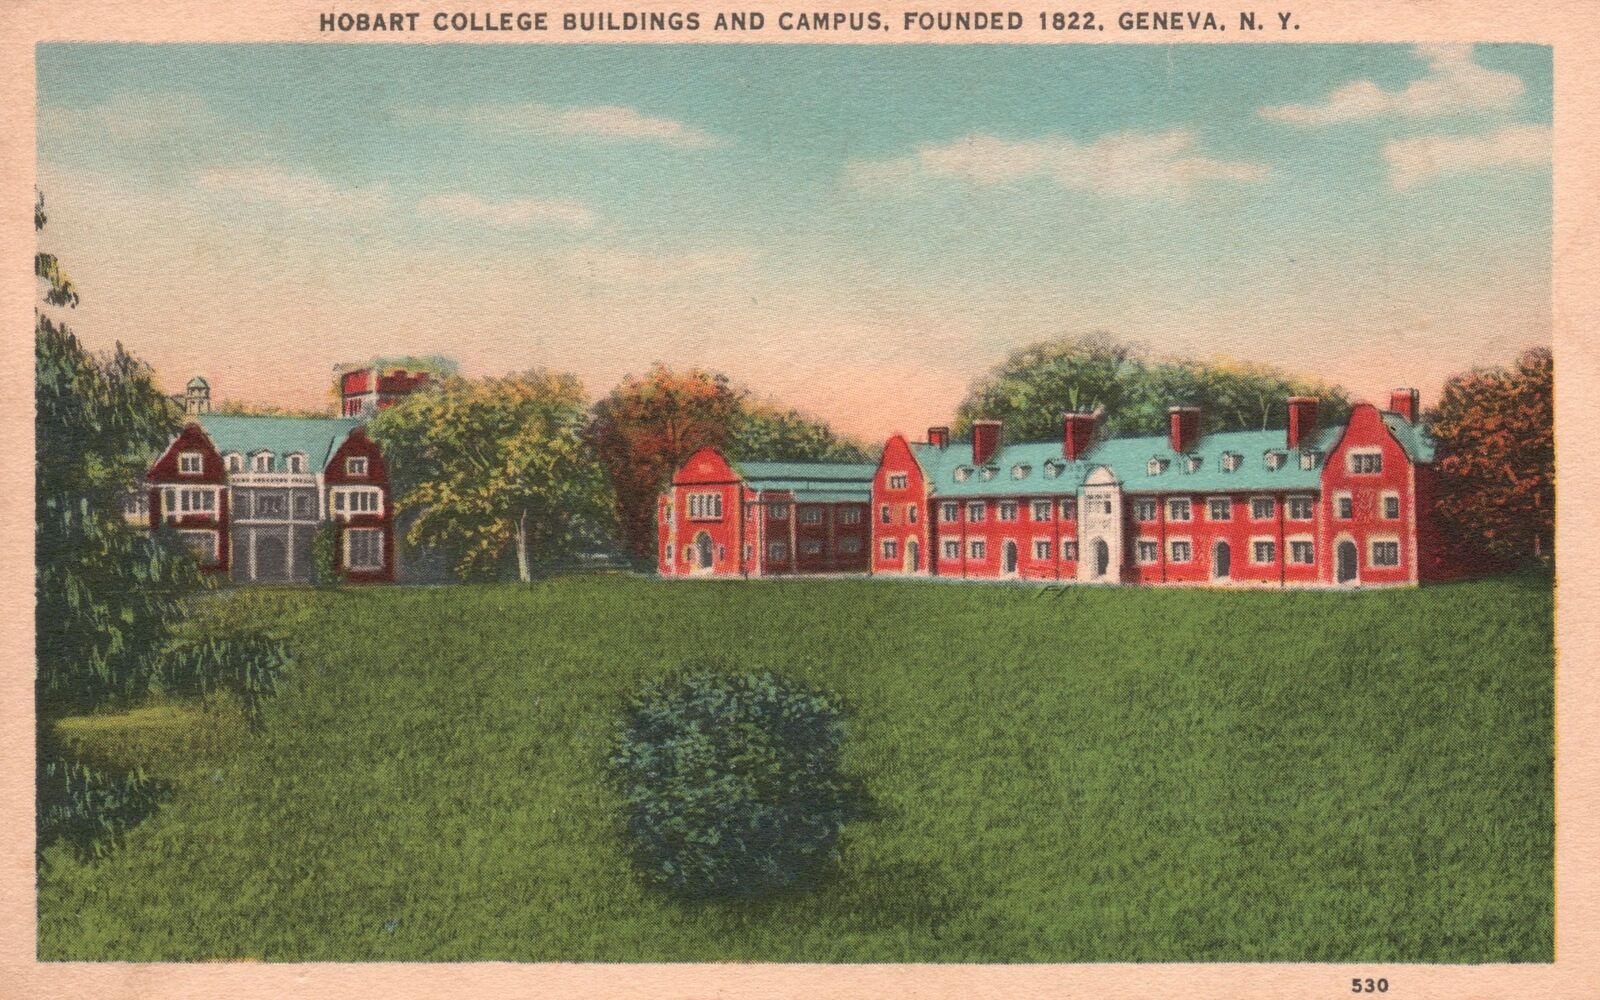 Vintage Postcard 1937 Hobart College Buildings & Campus Founded 1822 Geneva NY